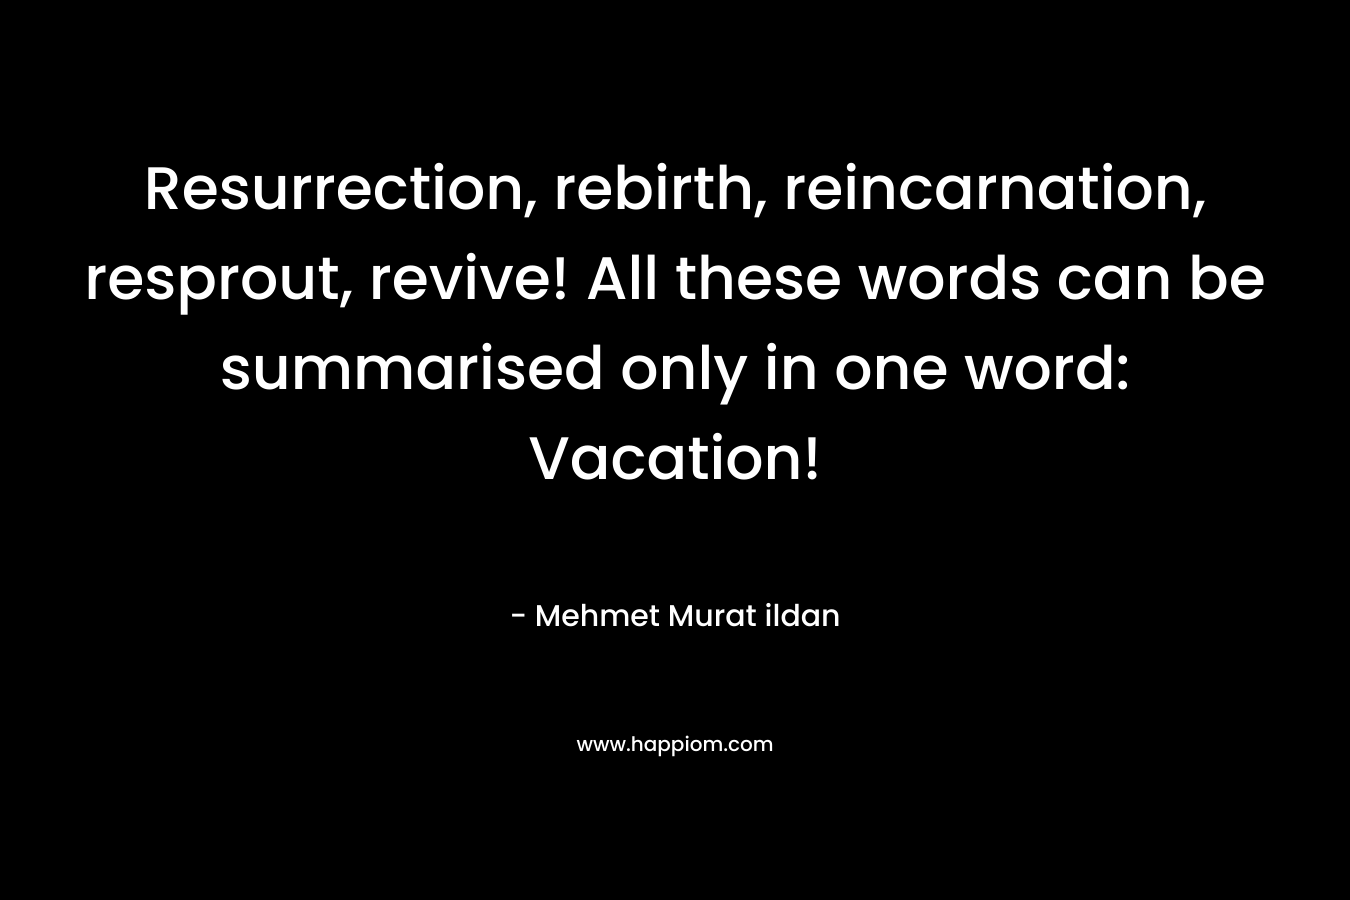 Resurrection, rebirth, reincarnation, resprout, revive! All these words can be summarised only in one word: Vacation! – Mehmet Murat ildan